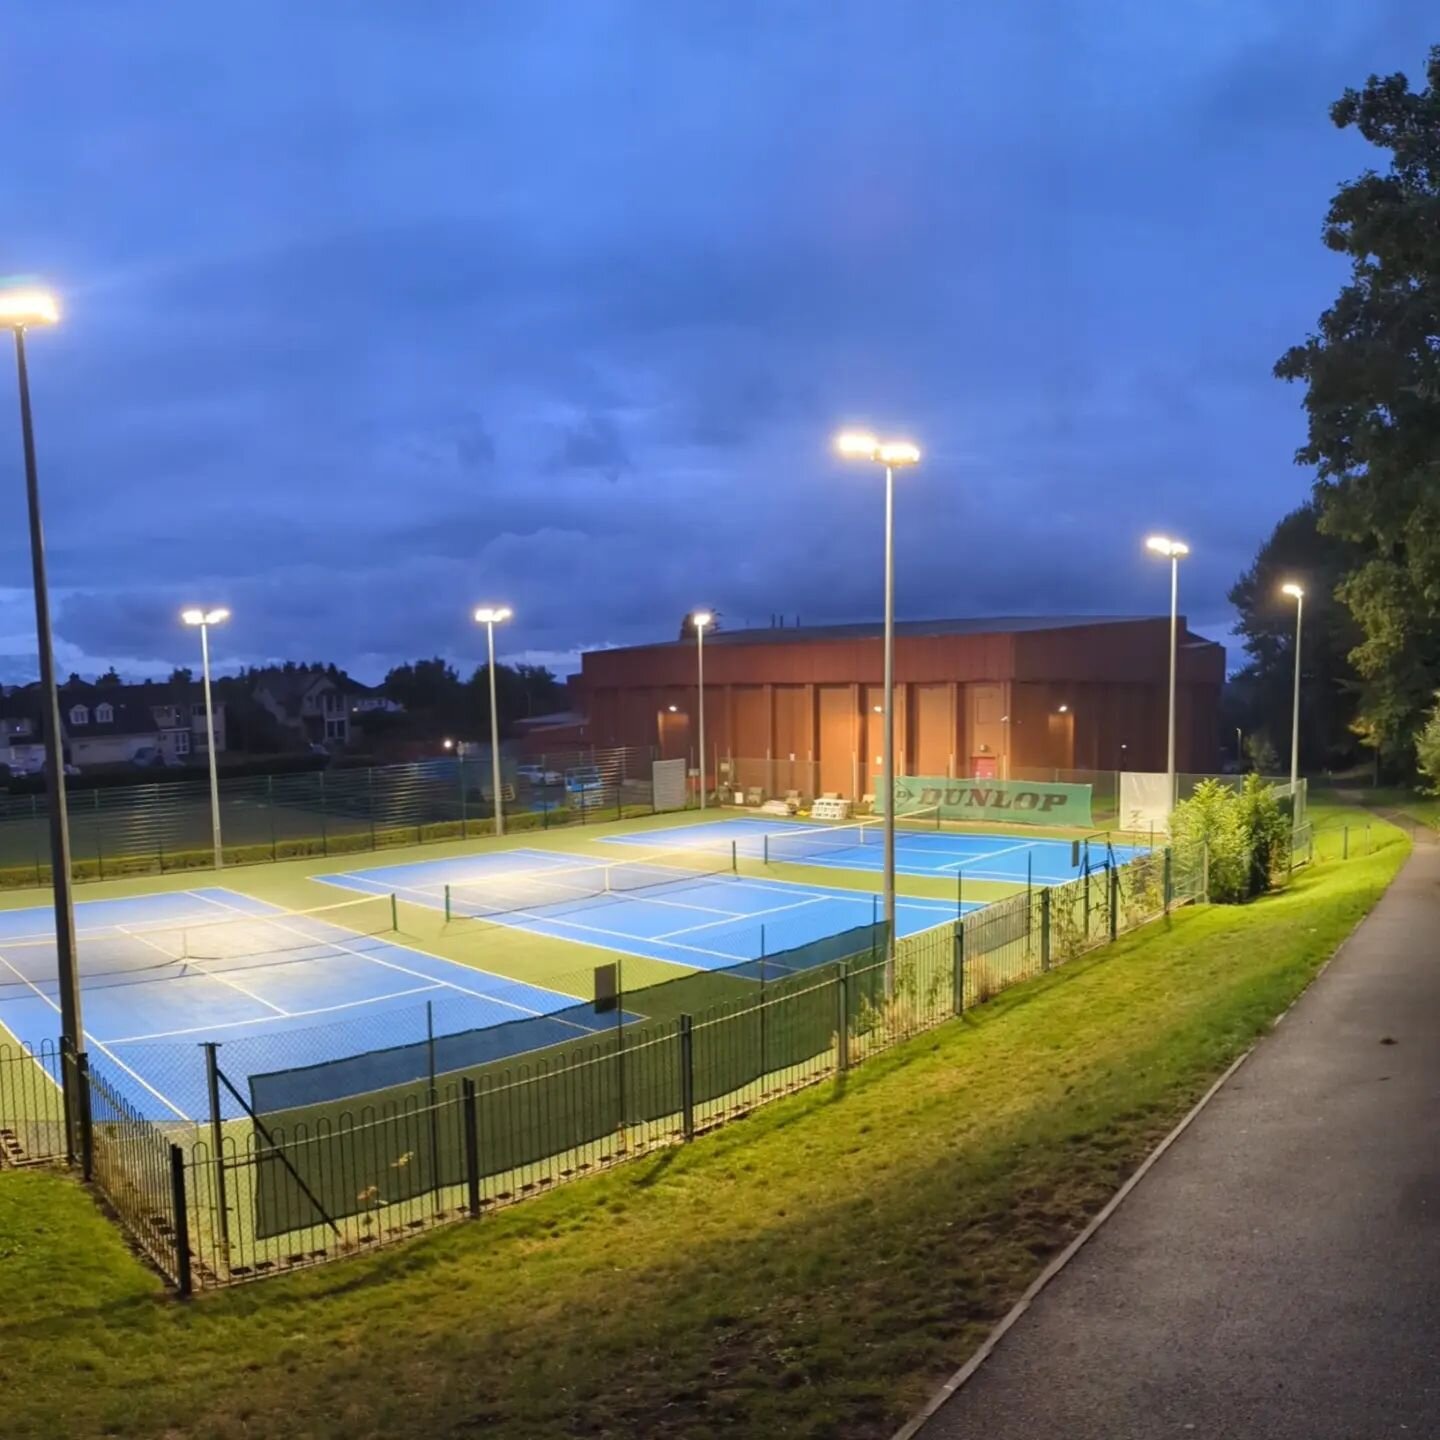 Llantrisant Tennis club reduced their energy consumption by 50% and improved their light levels #ledlights #sportlighting #sestechnologiesuk #energysaving